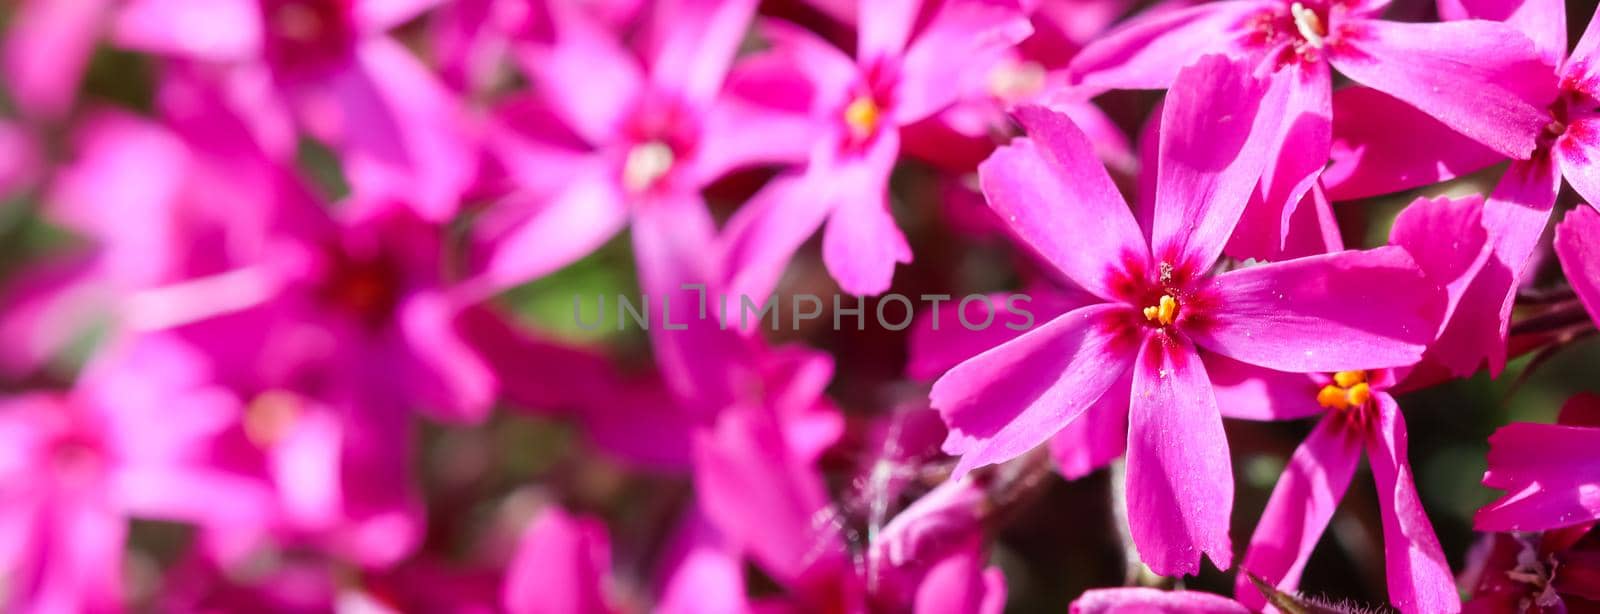 Pink flowers of Creeping Phlox in spring. Floral background.